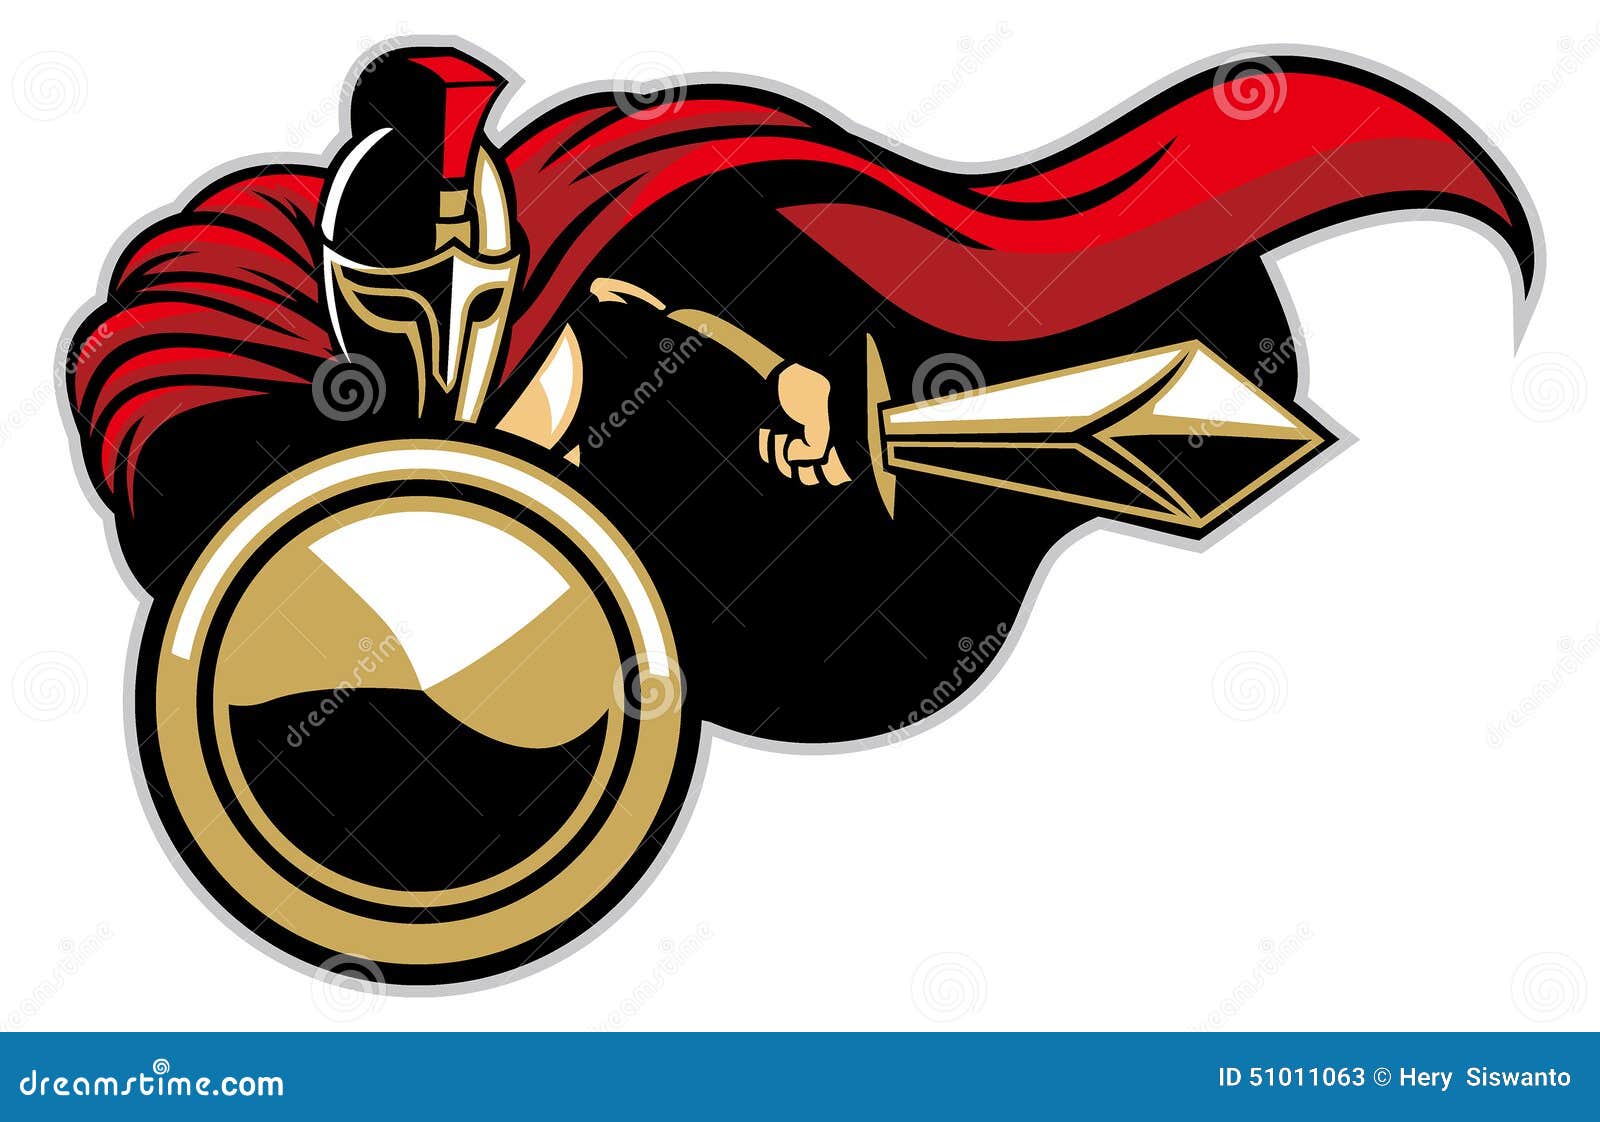 Army Patches Stock Illustrations – 383 Army Patches Stock Illustrations,  Vectors & Clipart - Dreamstime